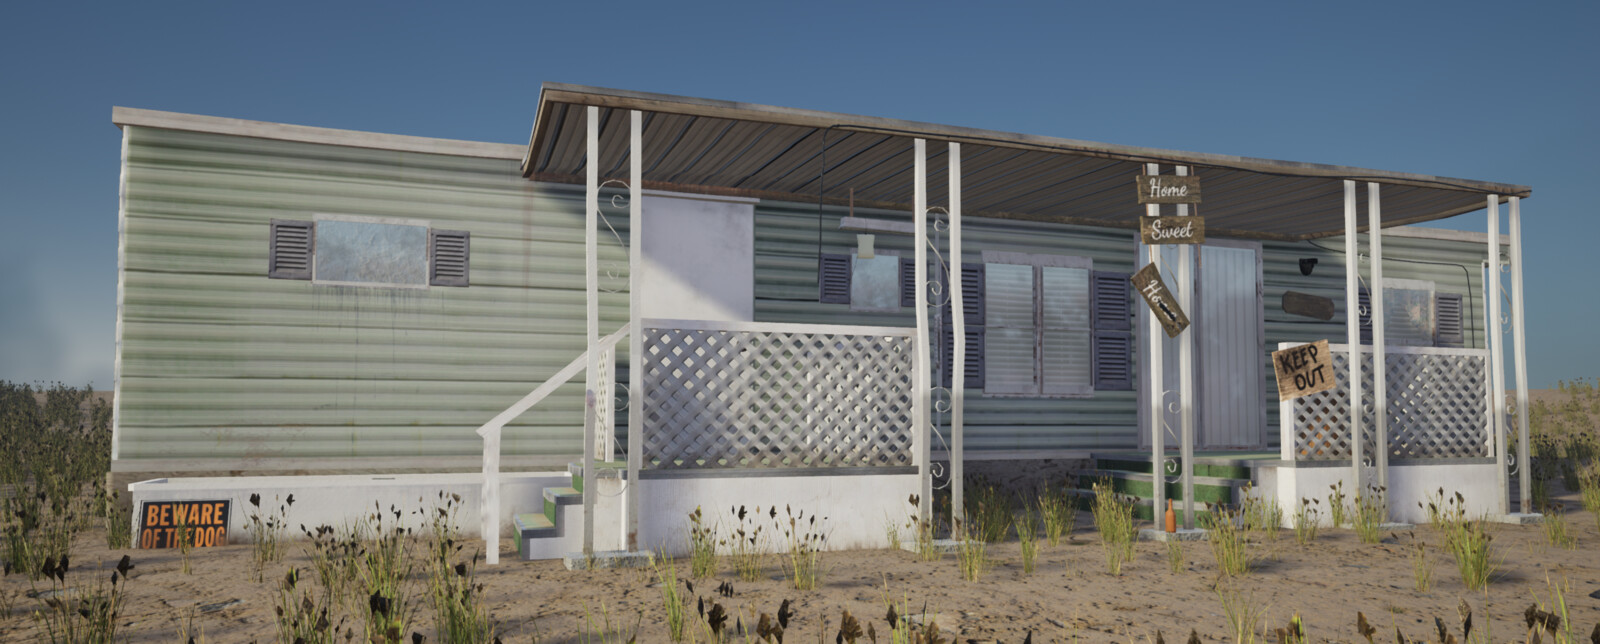 Mobile Home: Photorealism Art Test